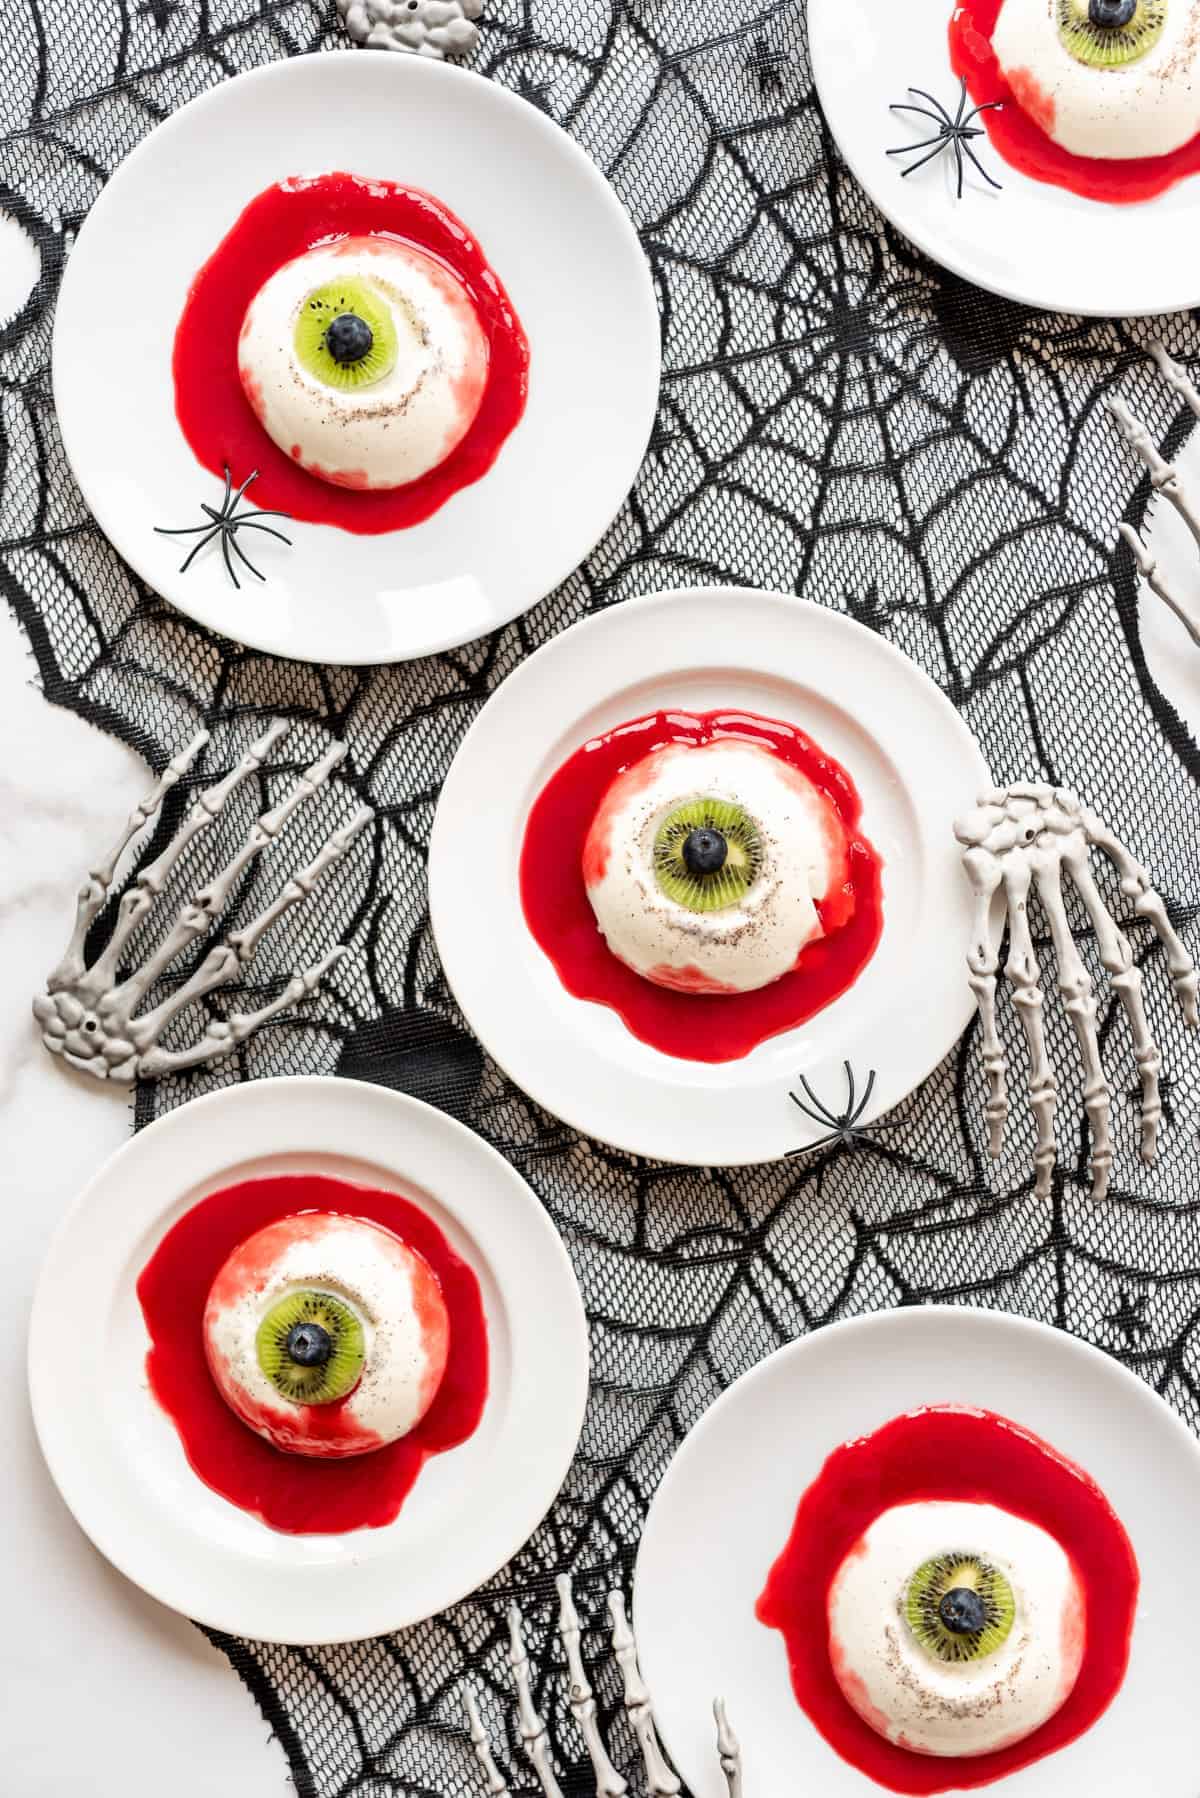 An image of panna cotta eyeballs made of kiwis and blueberries surrounded by Halloween decor.